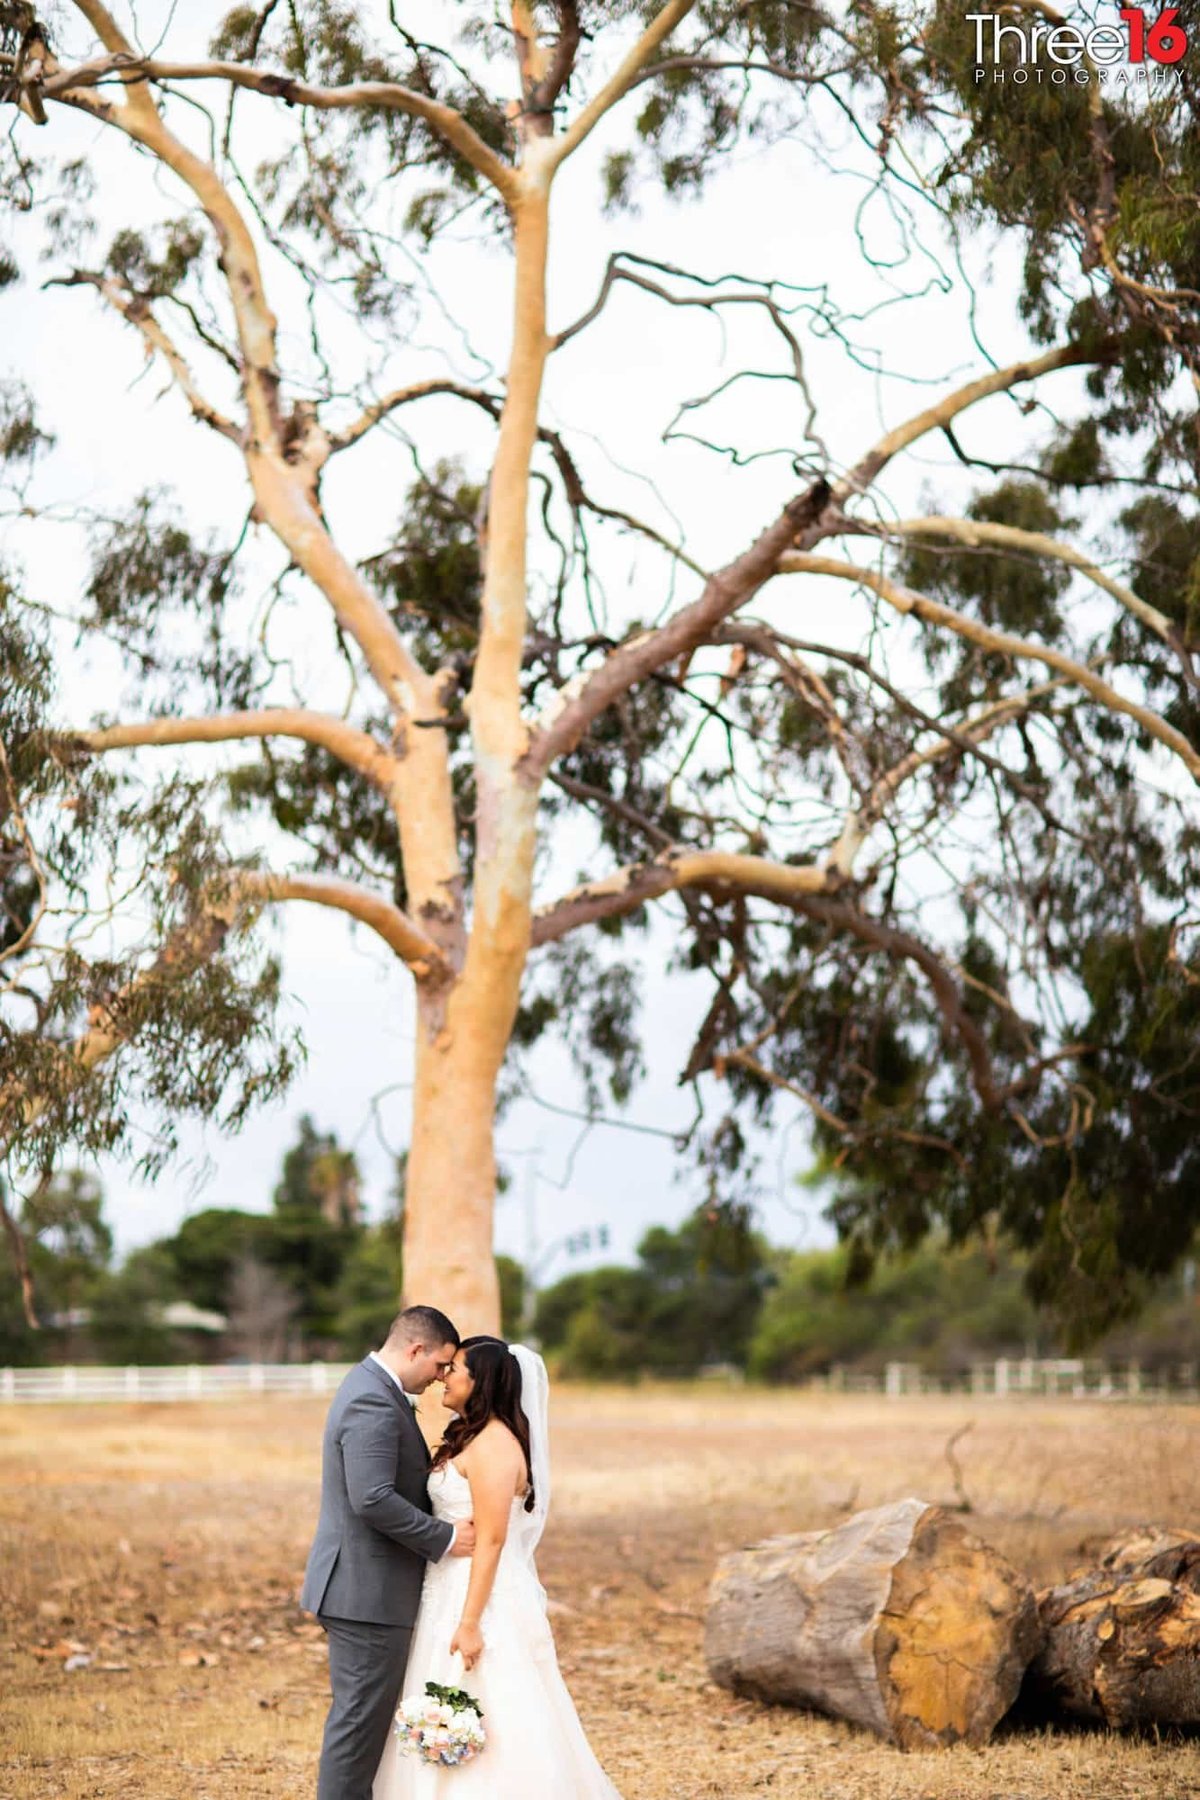 Special moment between Husband and Wife during the wedding photo shoot